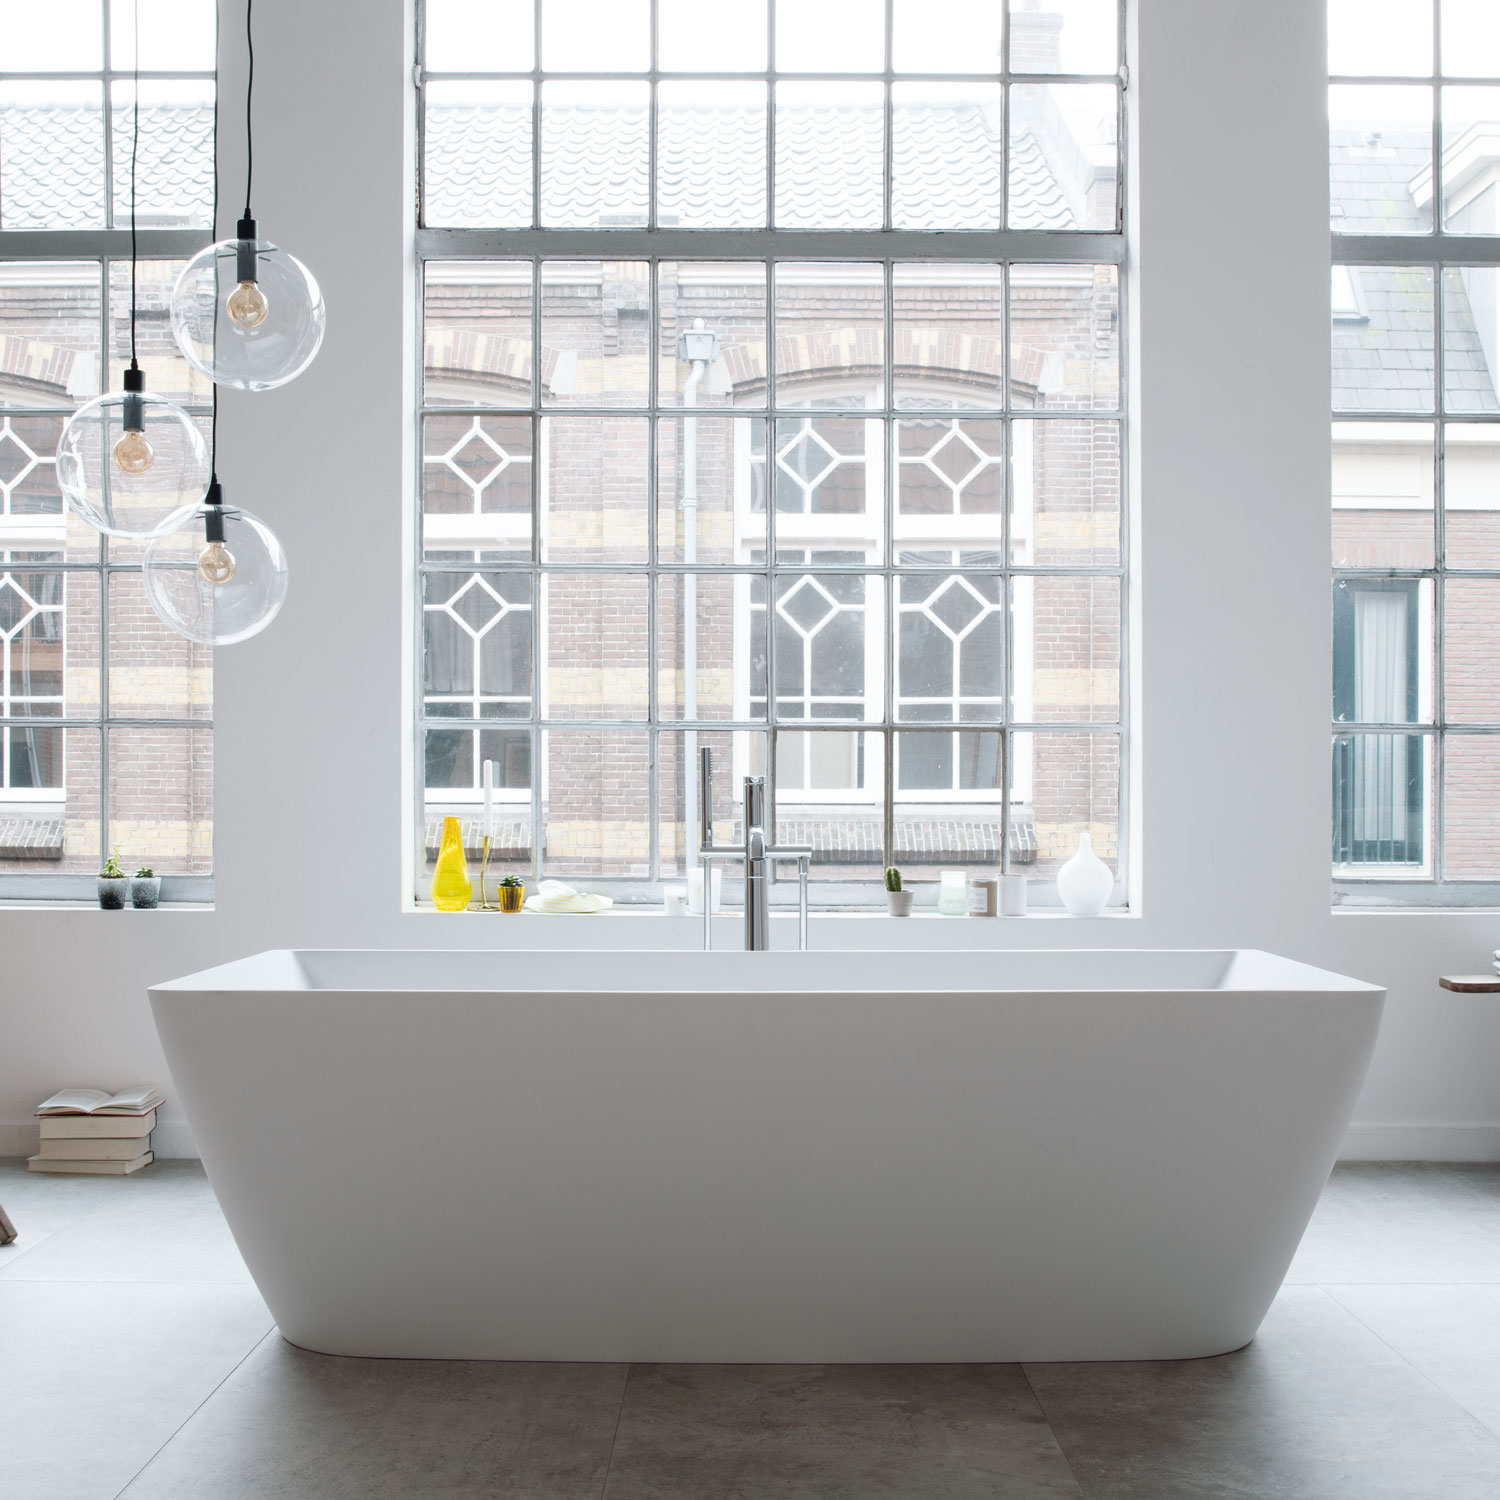 DuraSquare bathtub freestanding in front of window frontage
